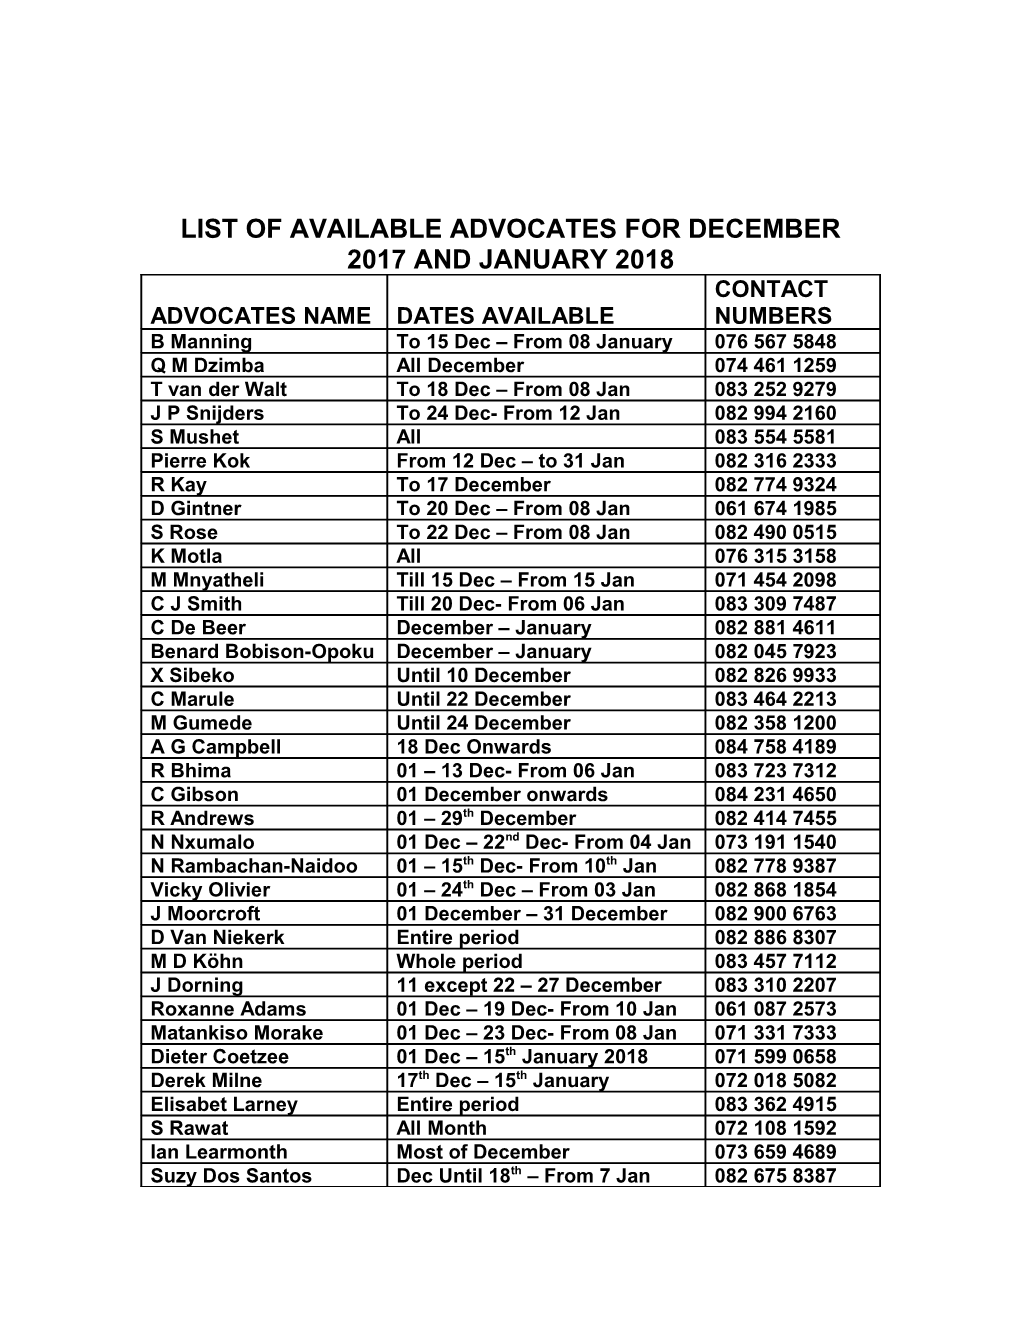 List of Available Advocates for December 2012 and January 2013